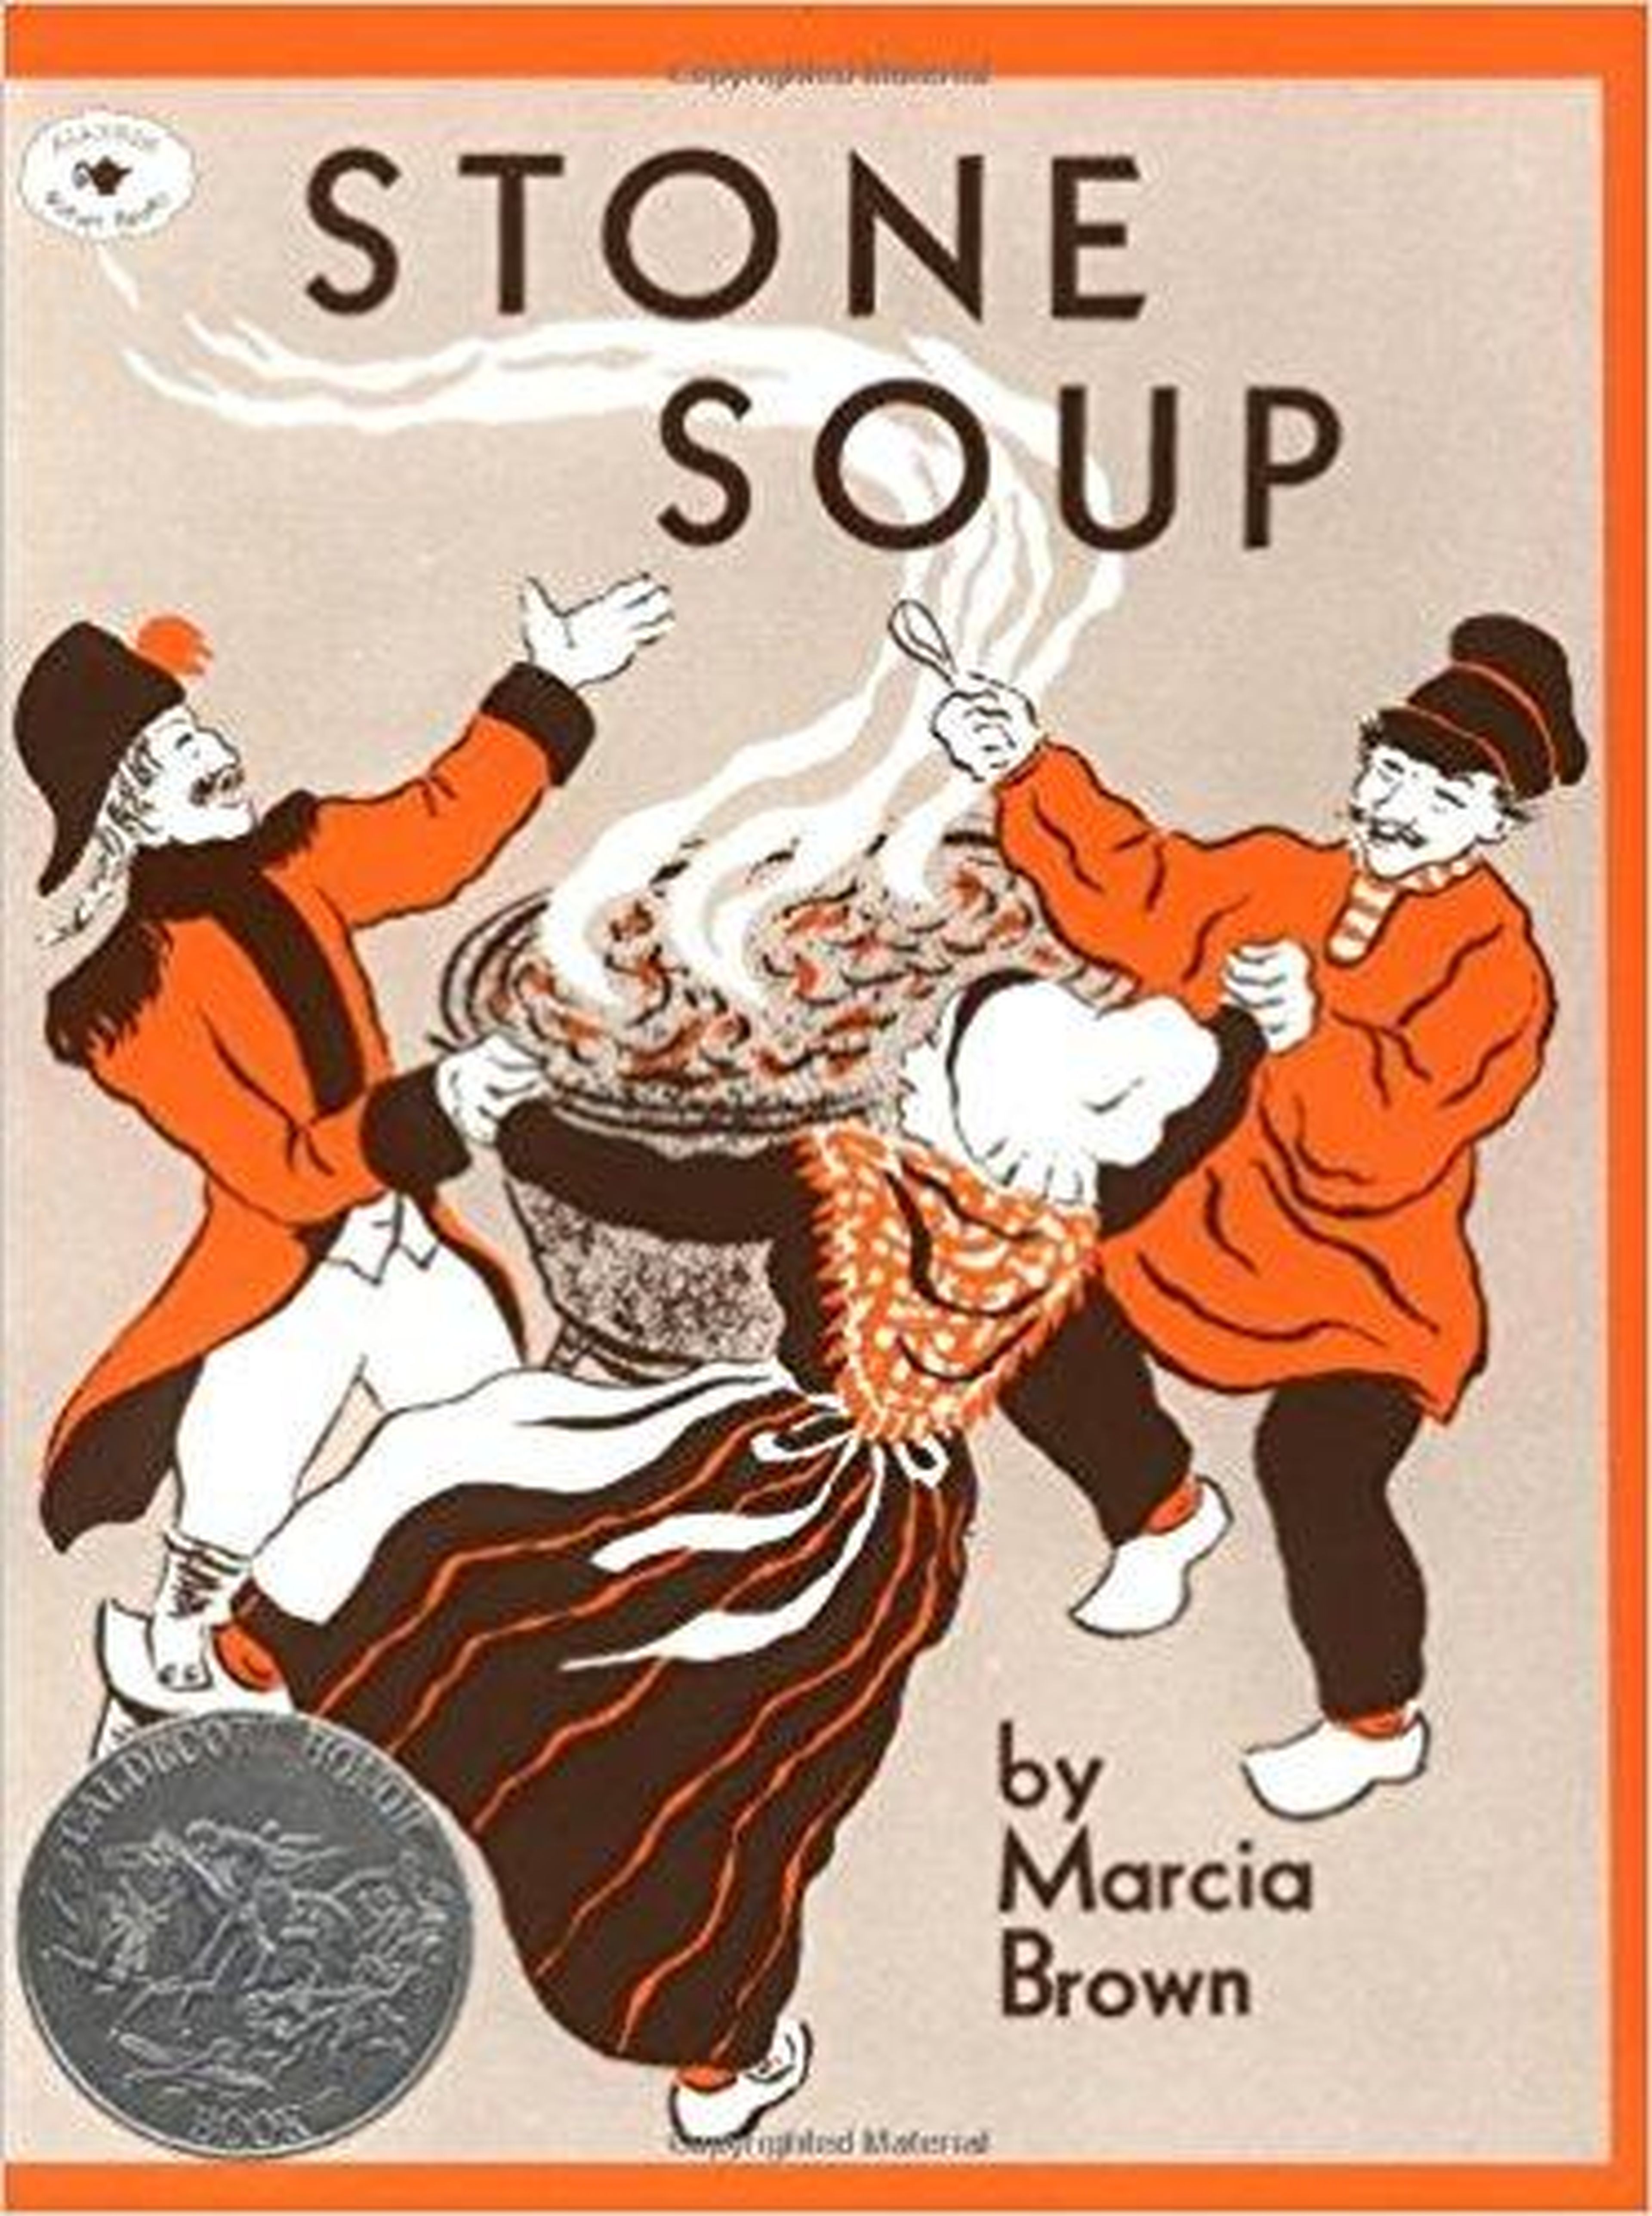 'Stone Soup' by Marcia Brown